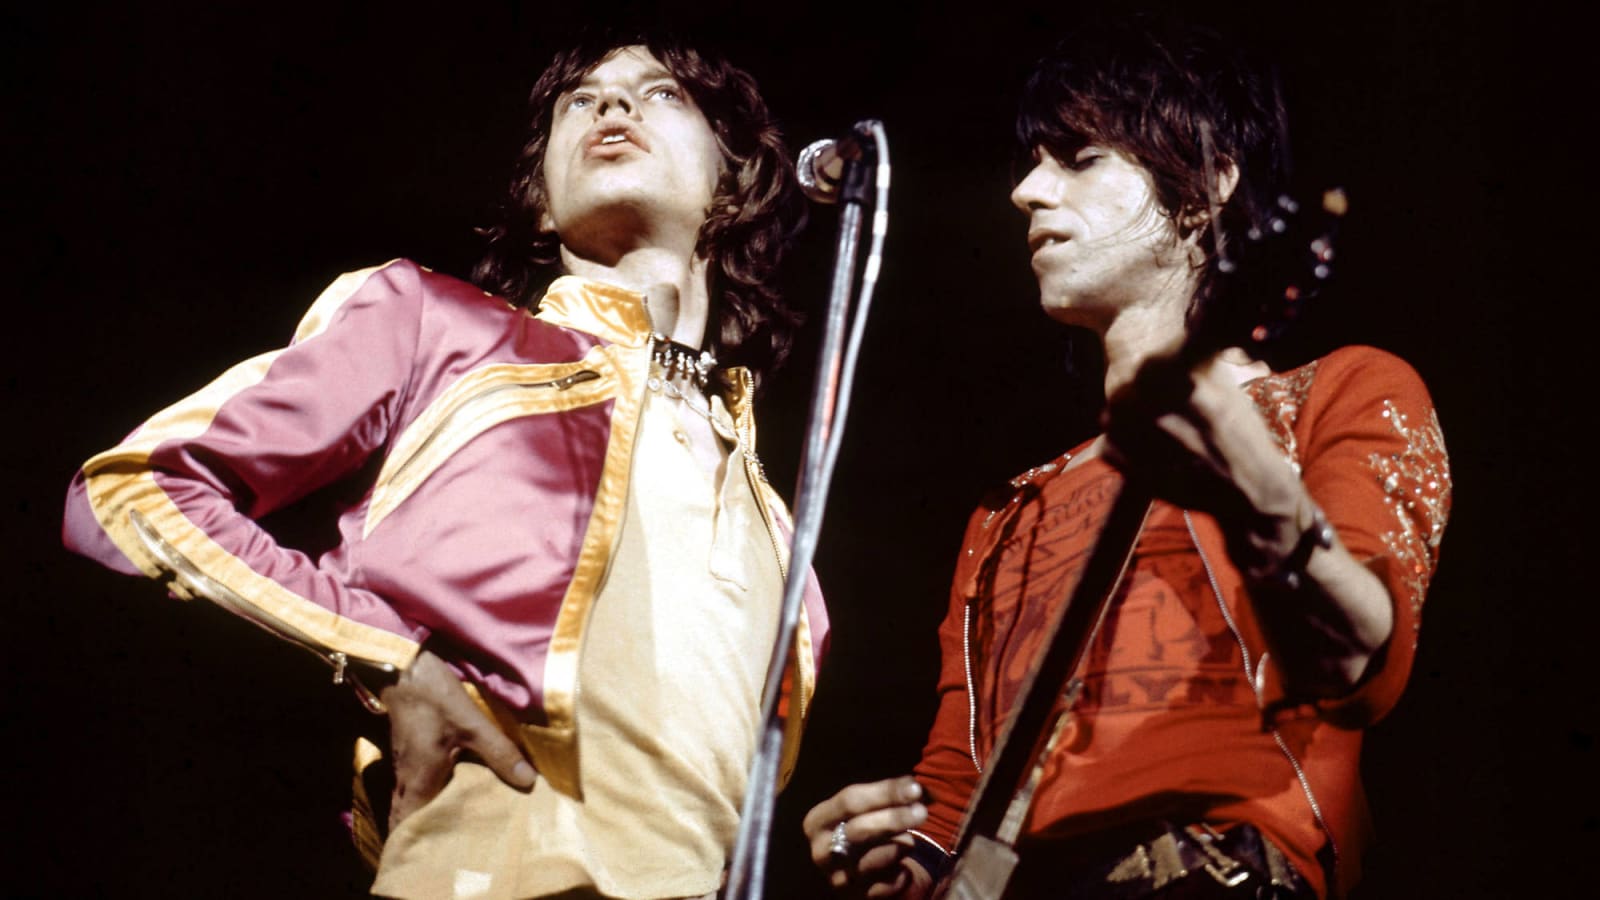 The best covers of Rolling Stones songs